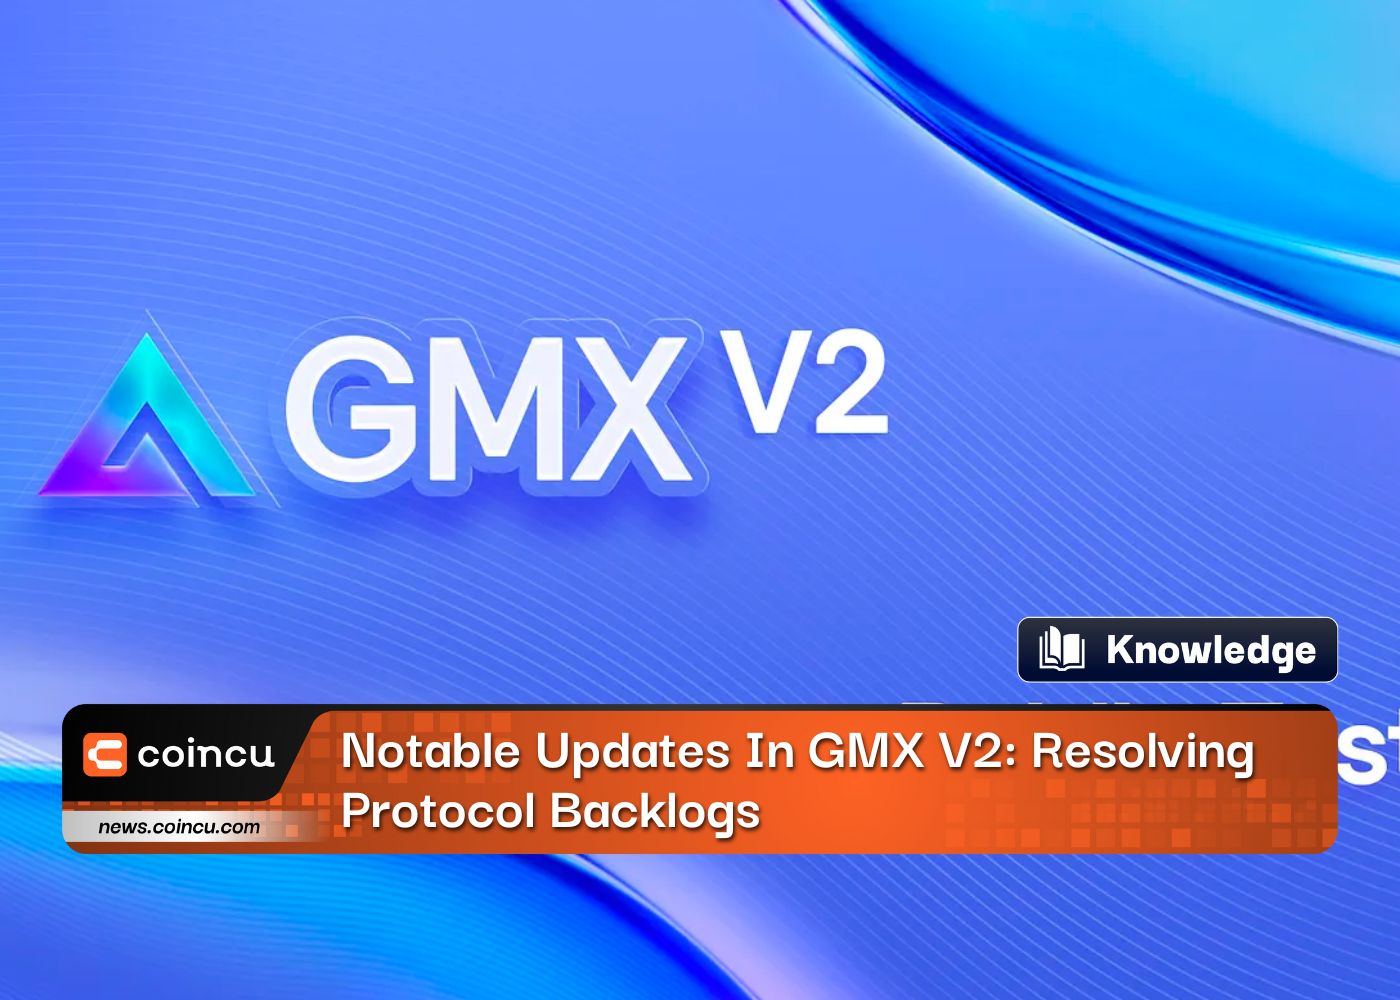 Notable Updates In GMX V2: Resolving Protocol Backlogs